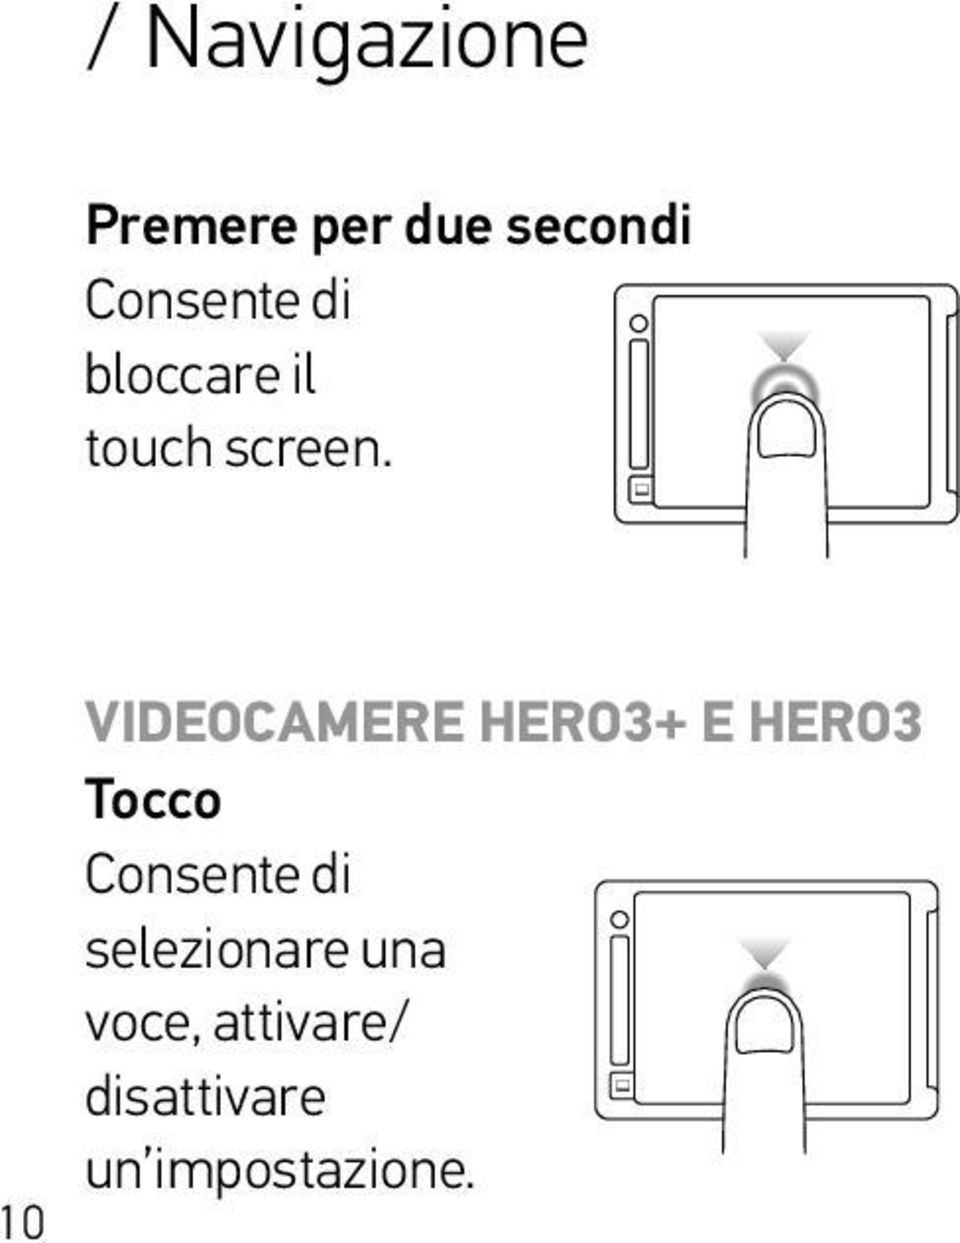 VIDEOCAMERE HERO3+ E HERO3 ght Tocco Double tap Tap Press + hold Swipe from